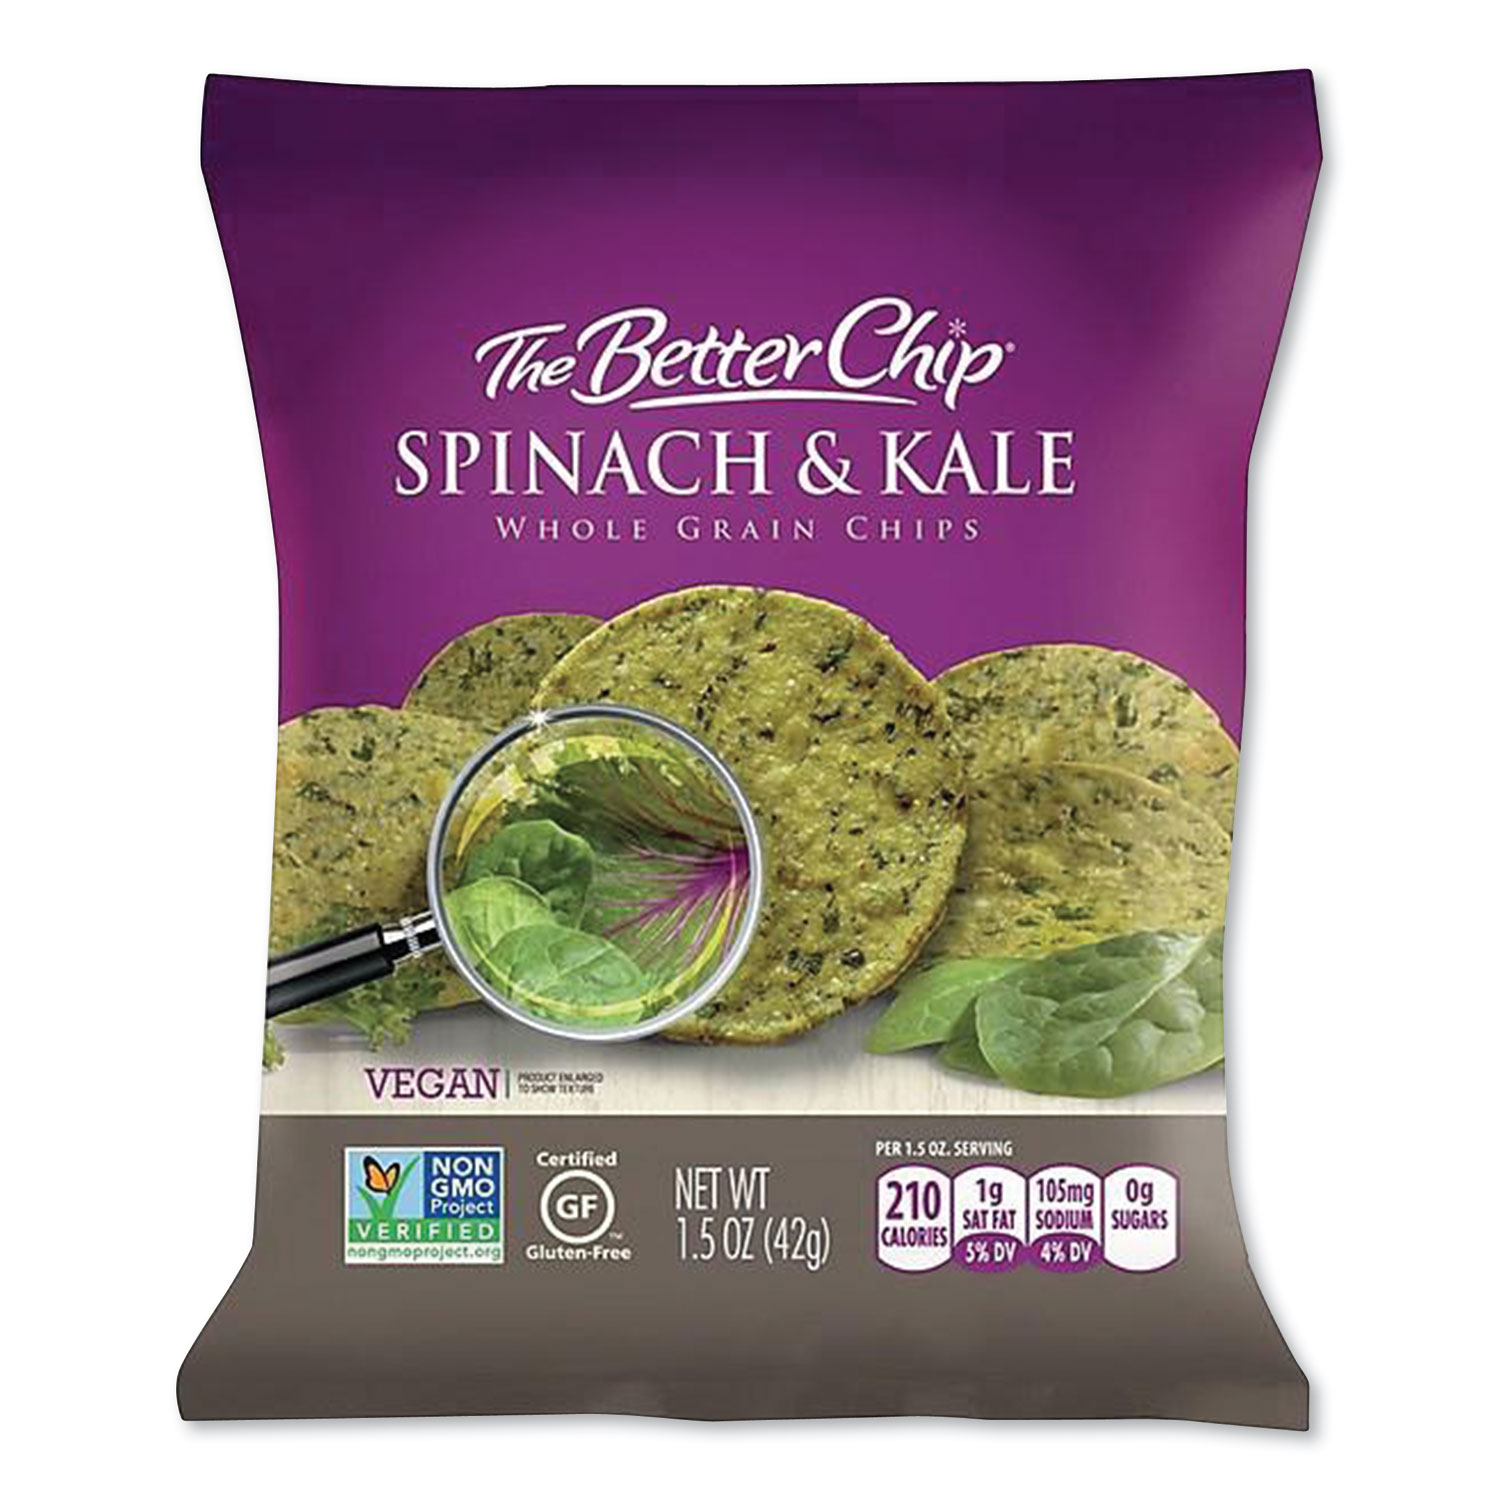  The Better Chip 56095 Whole Grain Chips, Spinach and Kale, 1.5 oz Bag, 27/Carton (SUG1973855) 